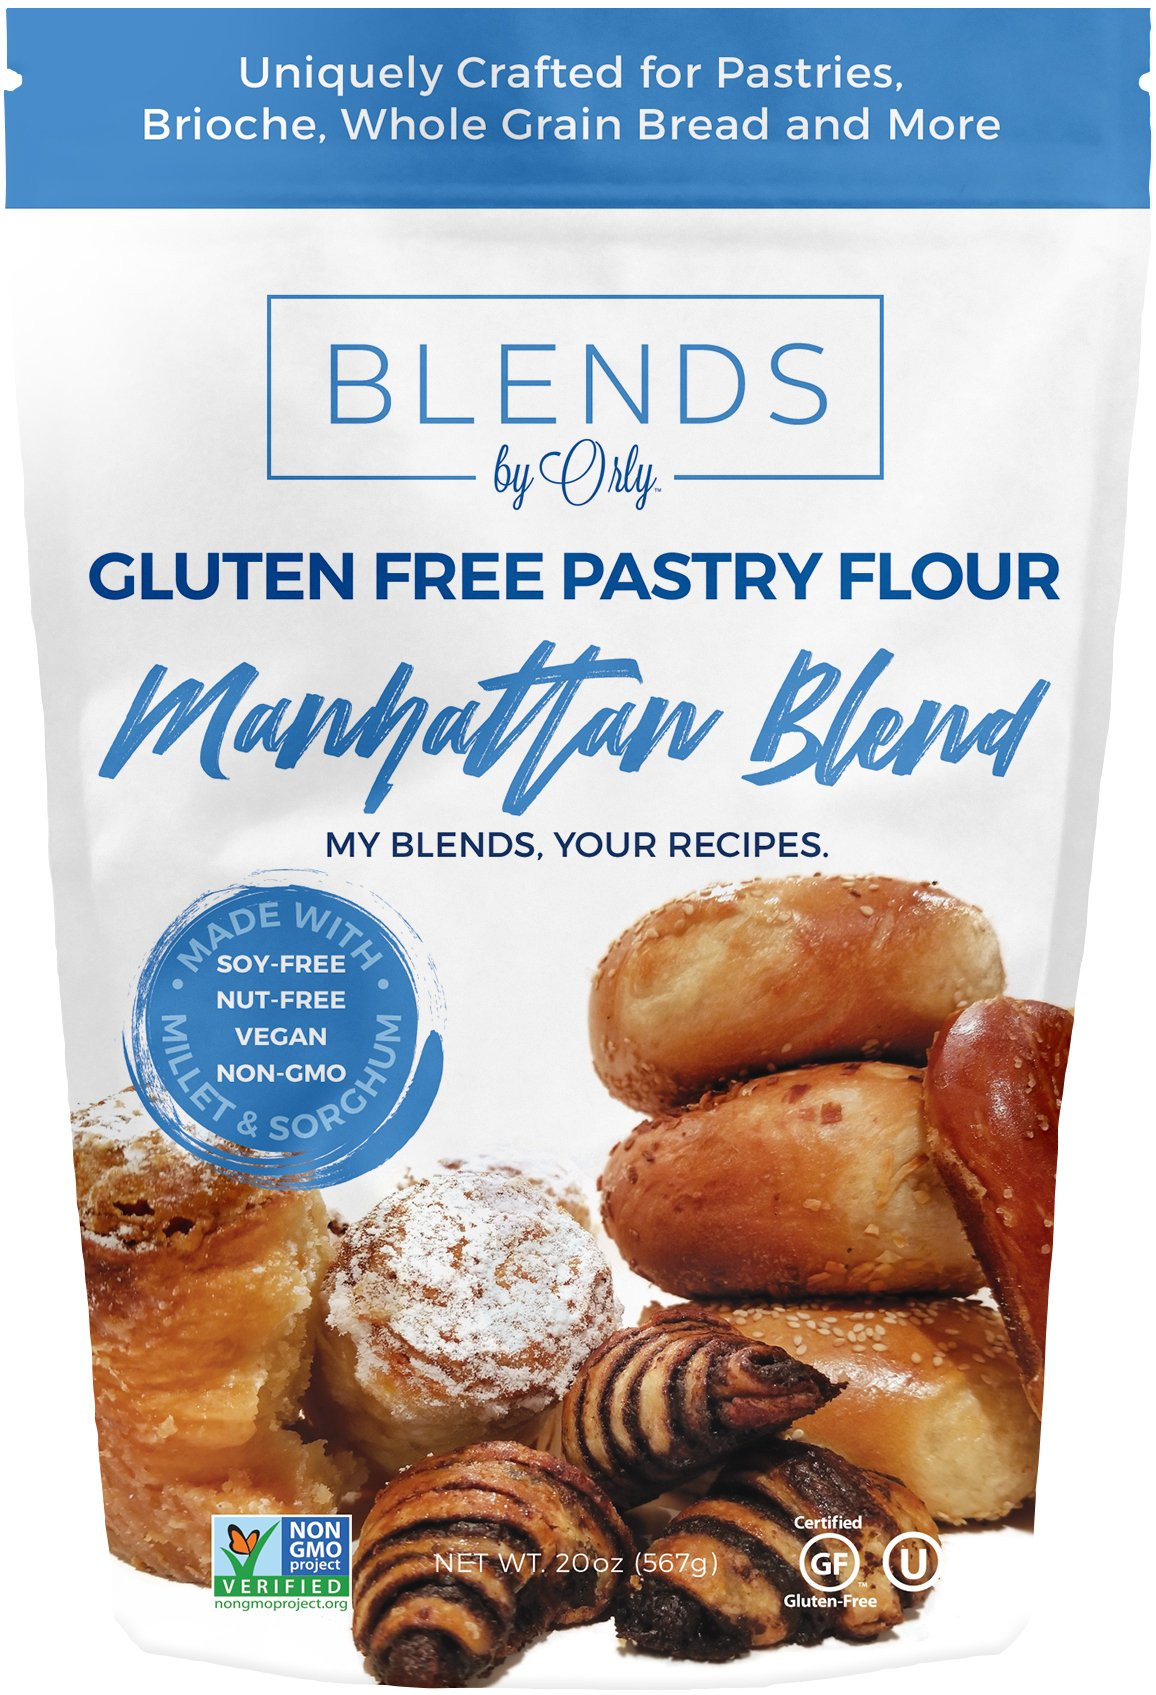 Gluten Free Bread Flour Blend
 Amazon Blends by Orly "Gluten Free" Traditional